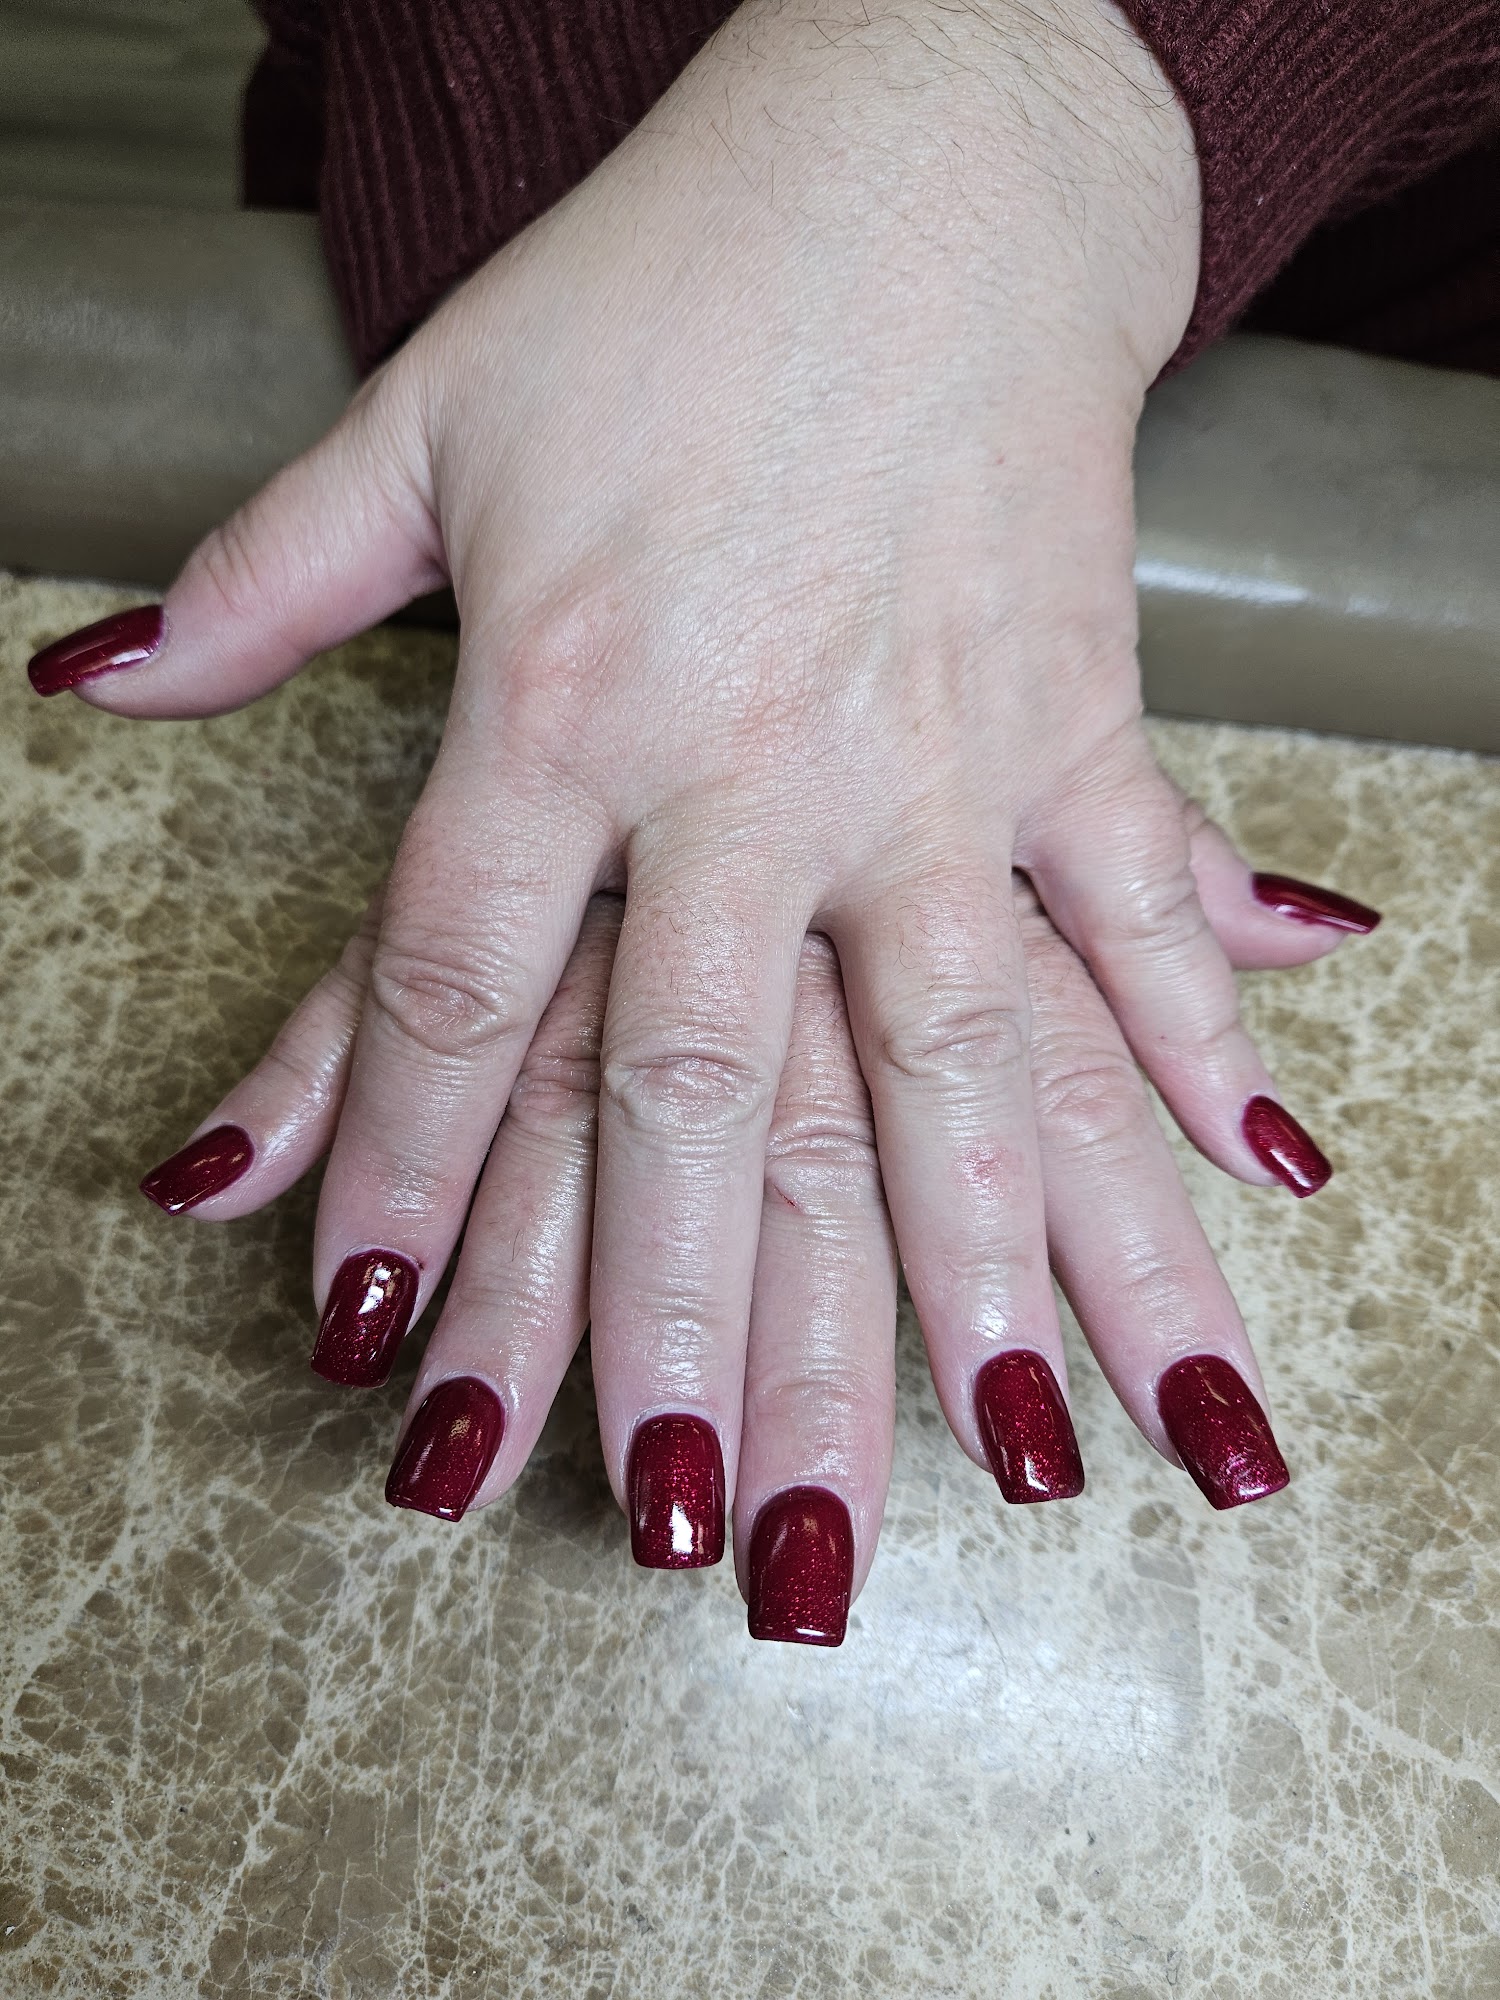 Shiny Nails in Terryville CT 311 Main St, Terryville Connecticut 06786